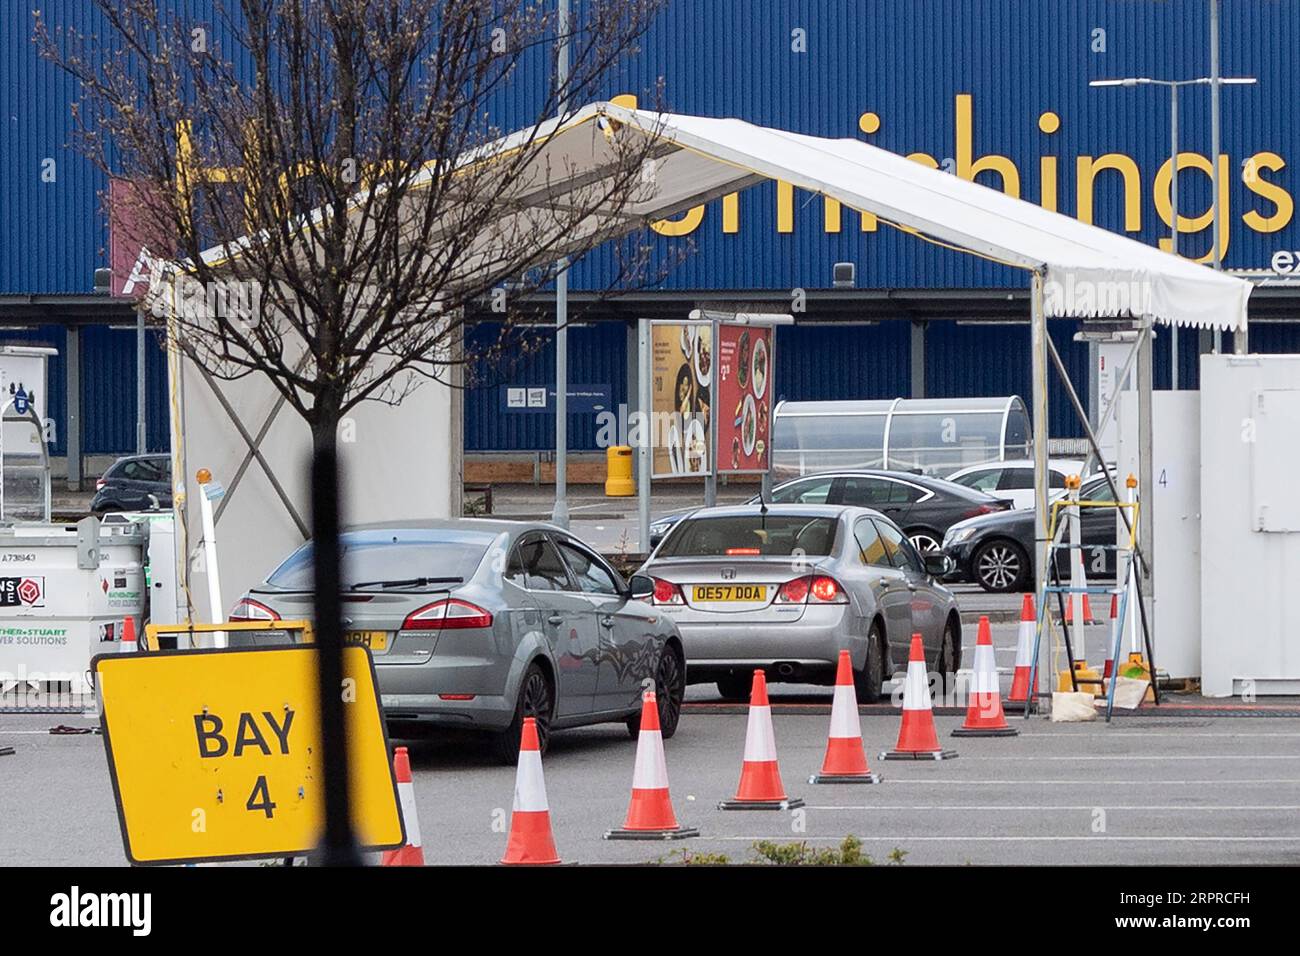 200401 -- LONDON, April 1, 2020 Xinhua -- Photo taken on March 31, 2020 shows a drive-through COVID-19 test station set up in the parking lot of an IKEA store in Wembley, northwest London, Britain. According to local media, a COVID-19 test centre for National Health Service NHS staff workers has opened at the parking lot of an IKEA store in Wembley. Photo by Ray Tang/Xinhua BRITAIN-LONDON-COVID-19-TEST CENTRE-NHS STAFF PUBLICATIONxNOTxINxCHN Stock Photo